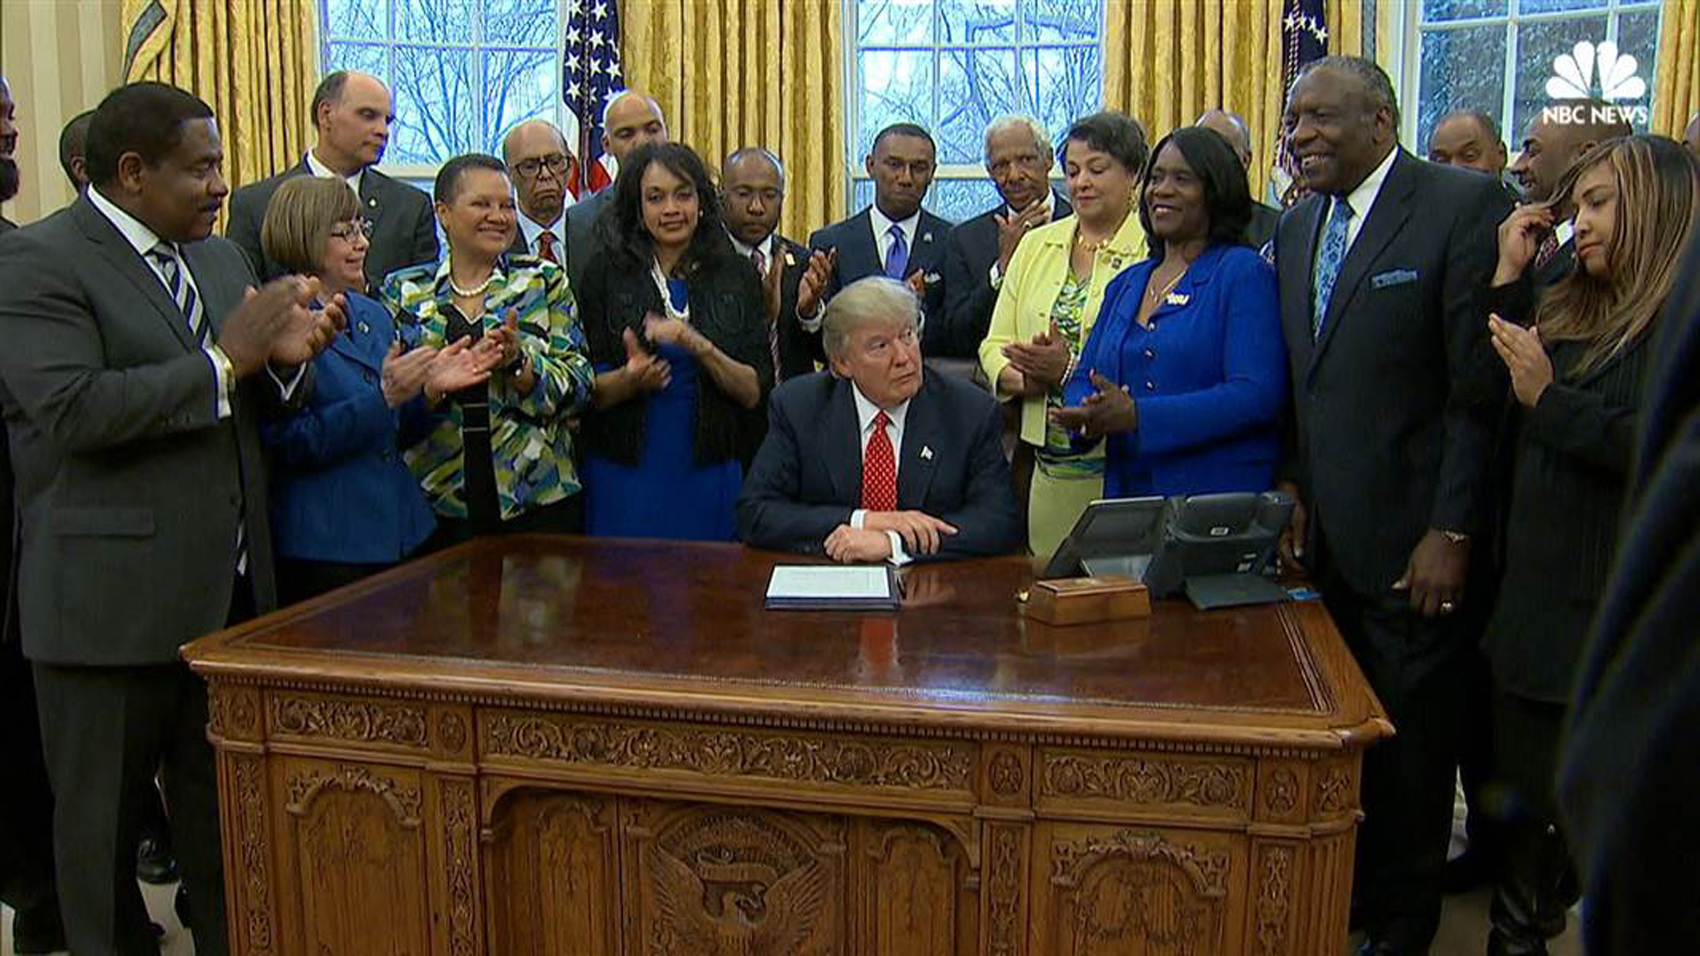 DSU President Harry Williams, standing behind President Trump, joins other HBCU presidents for the Executive Order signing. To the right of Trump in yellow outfit is Dr. Cynthia Jackson-Hammond, former DSU chair, now president of Central St. Univ.